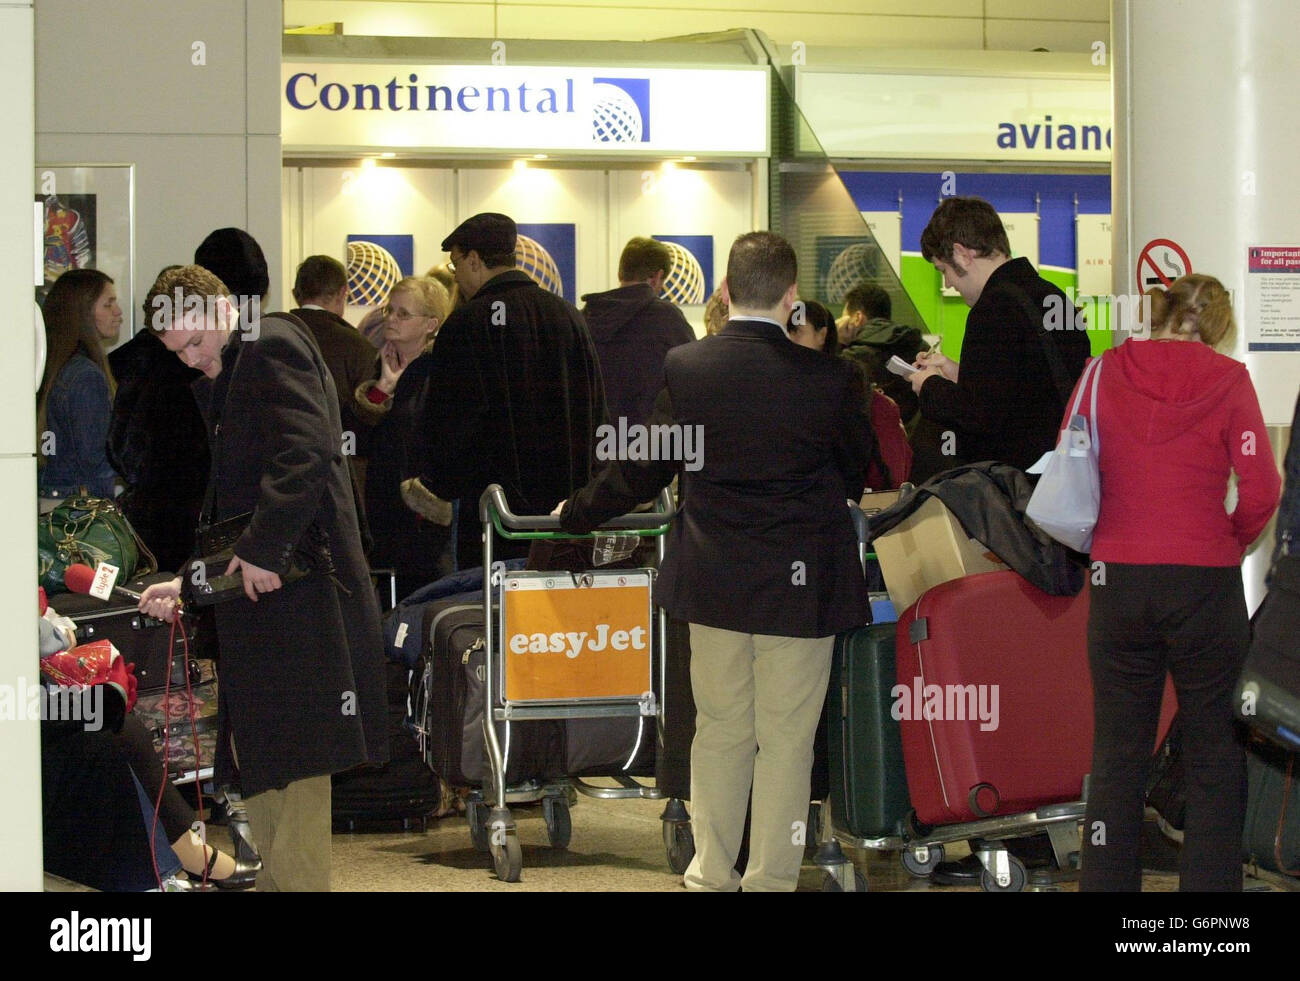 Passengers stranded at Glasgow airport, after their Continental Airlines flight to Los Angeles was cancelled due to a security alert. It was one of six transatlantic flights from Britain and France grounded due to terrorist threats. Stock Photo